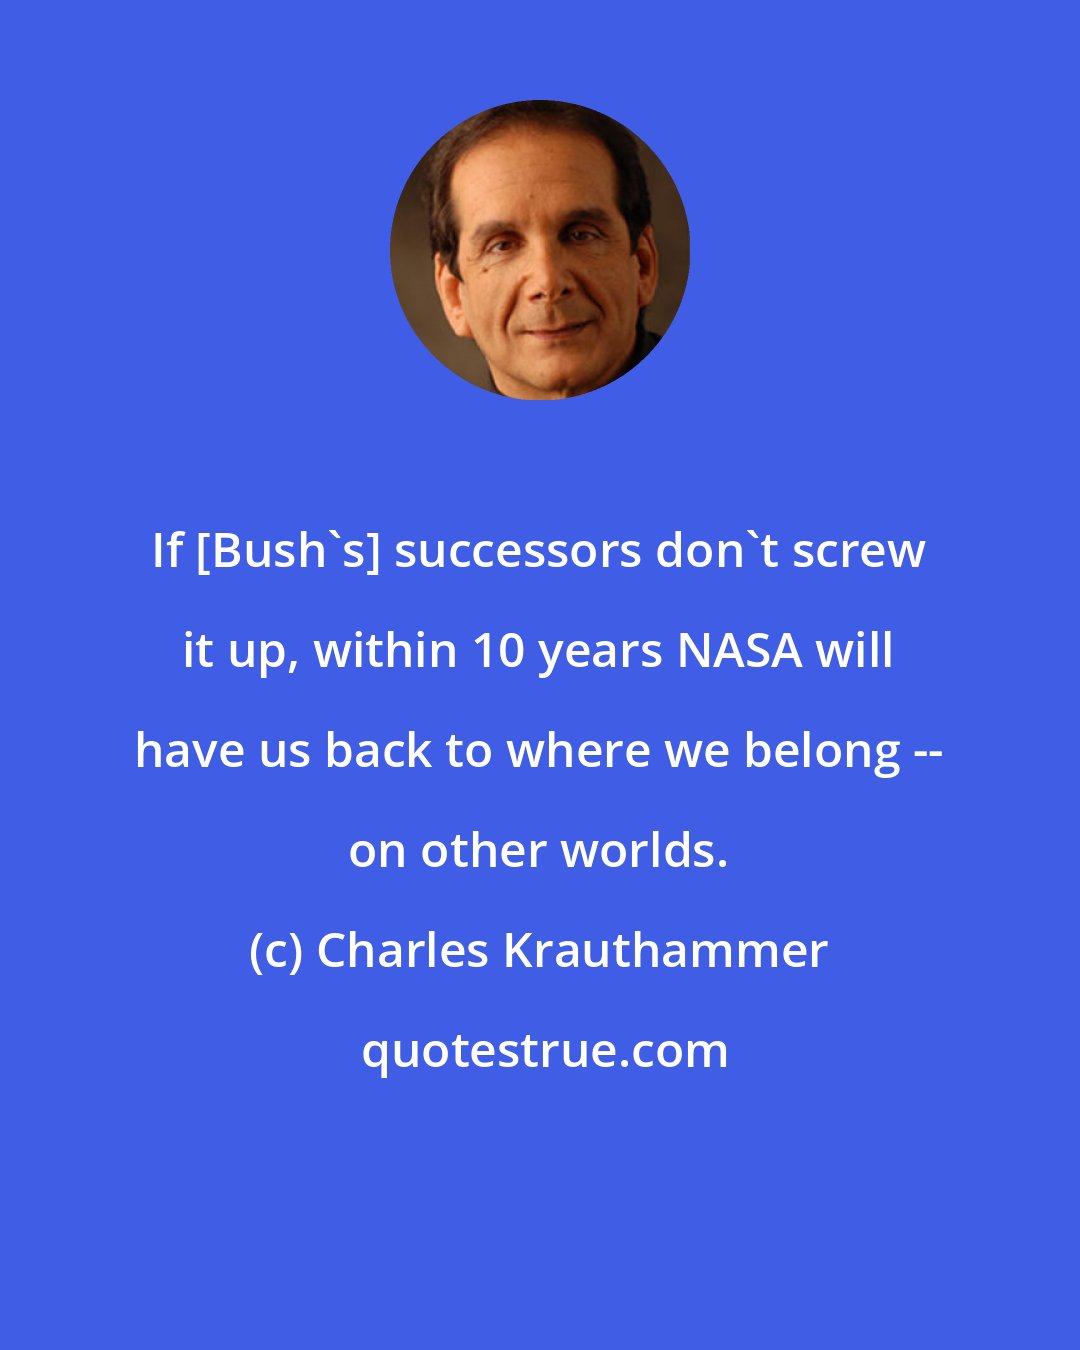 Charles Krauthammer: If [Bush's] successors don't screw it up, within 10 years NASA will have us back to where we belong -- on other worlds.